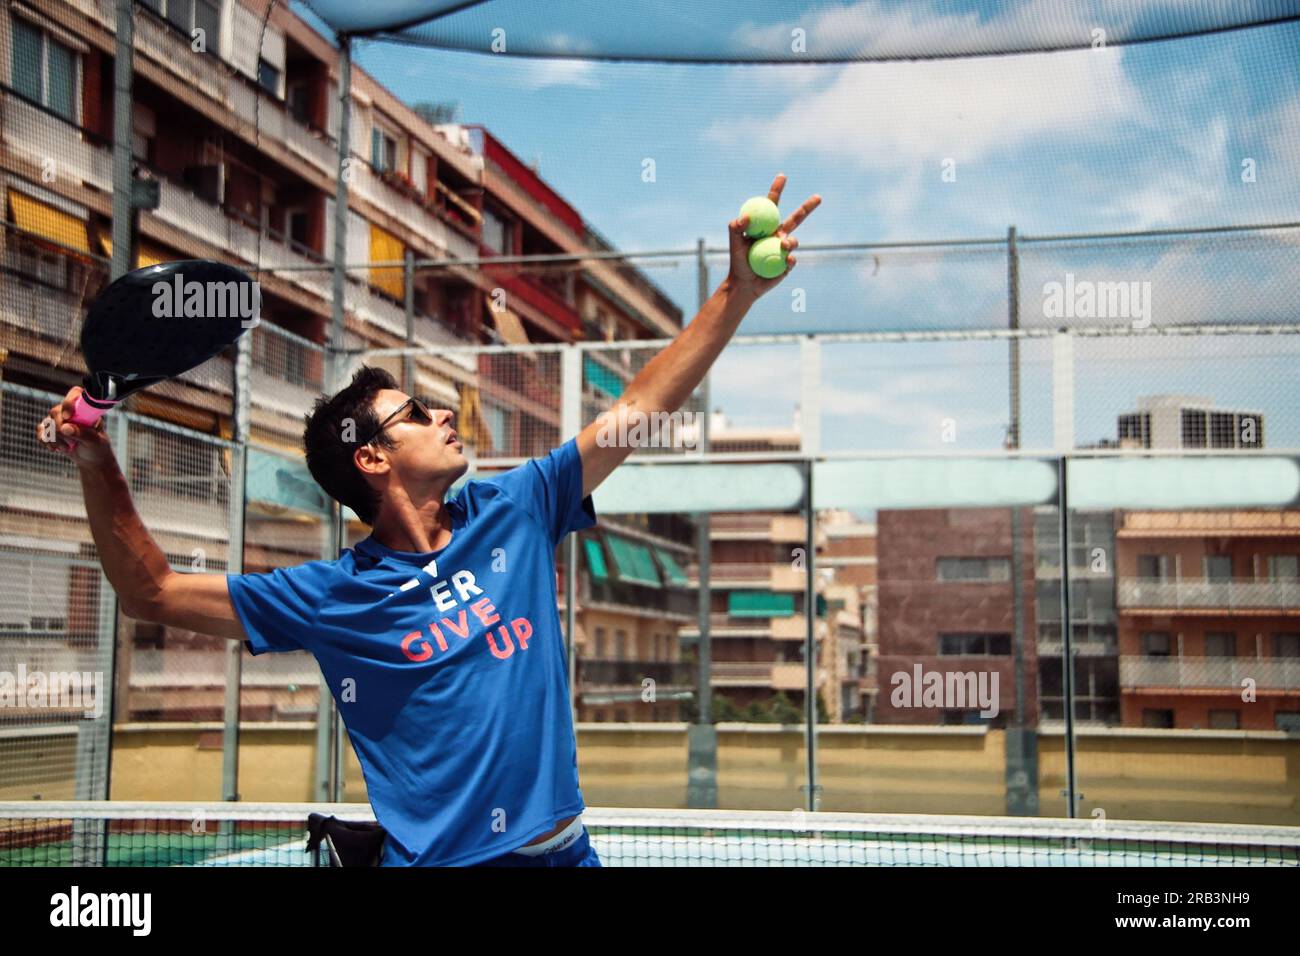 Man in blue playing padel. Stock Photo